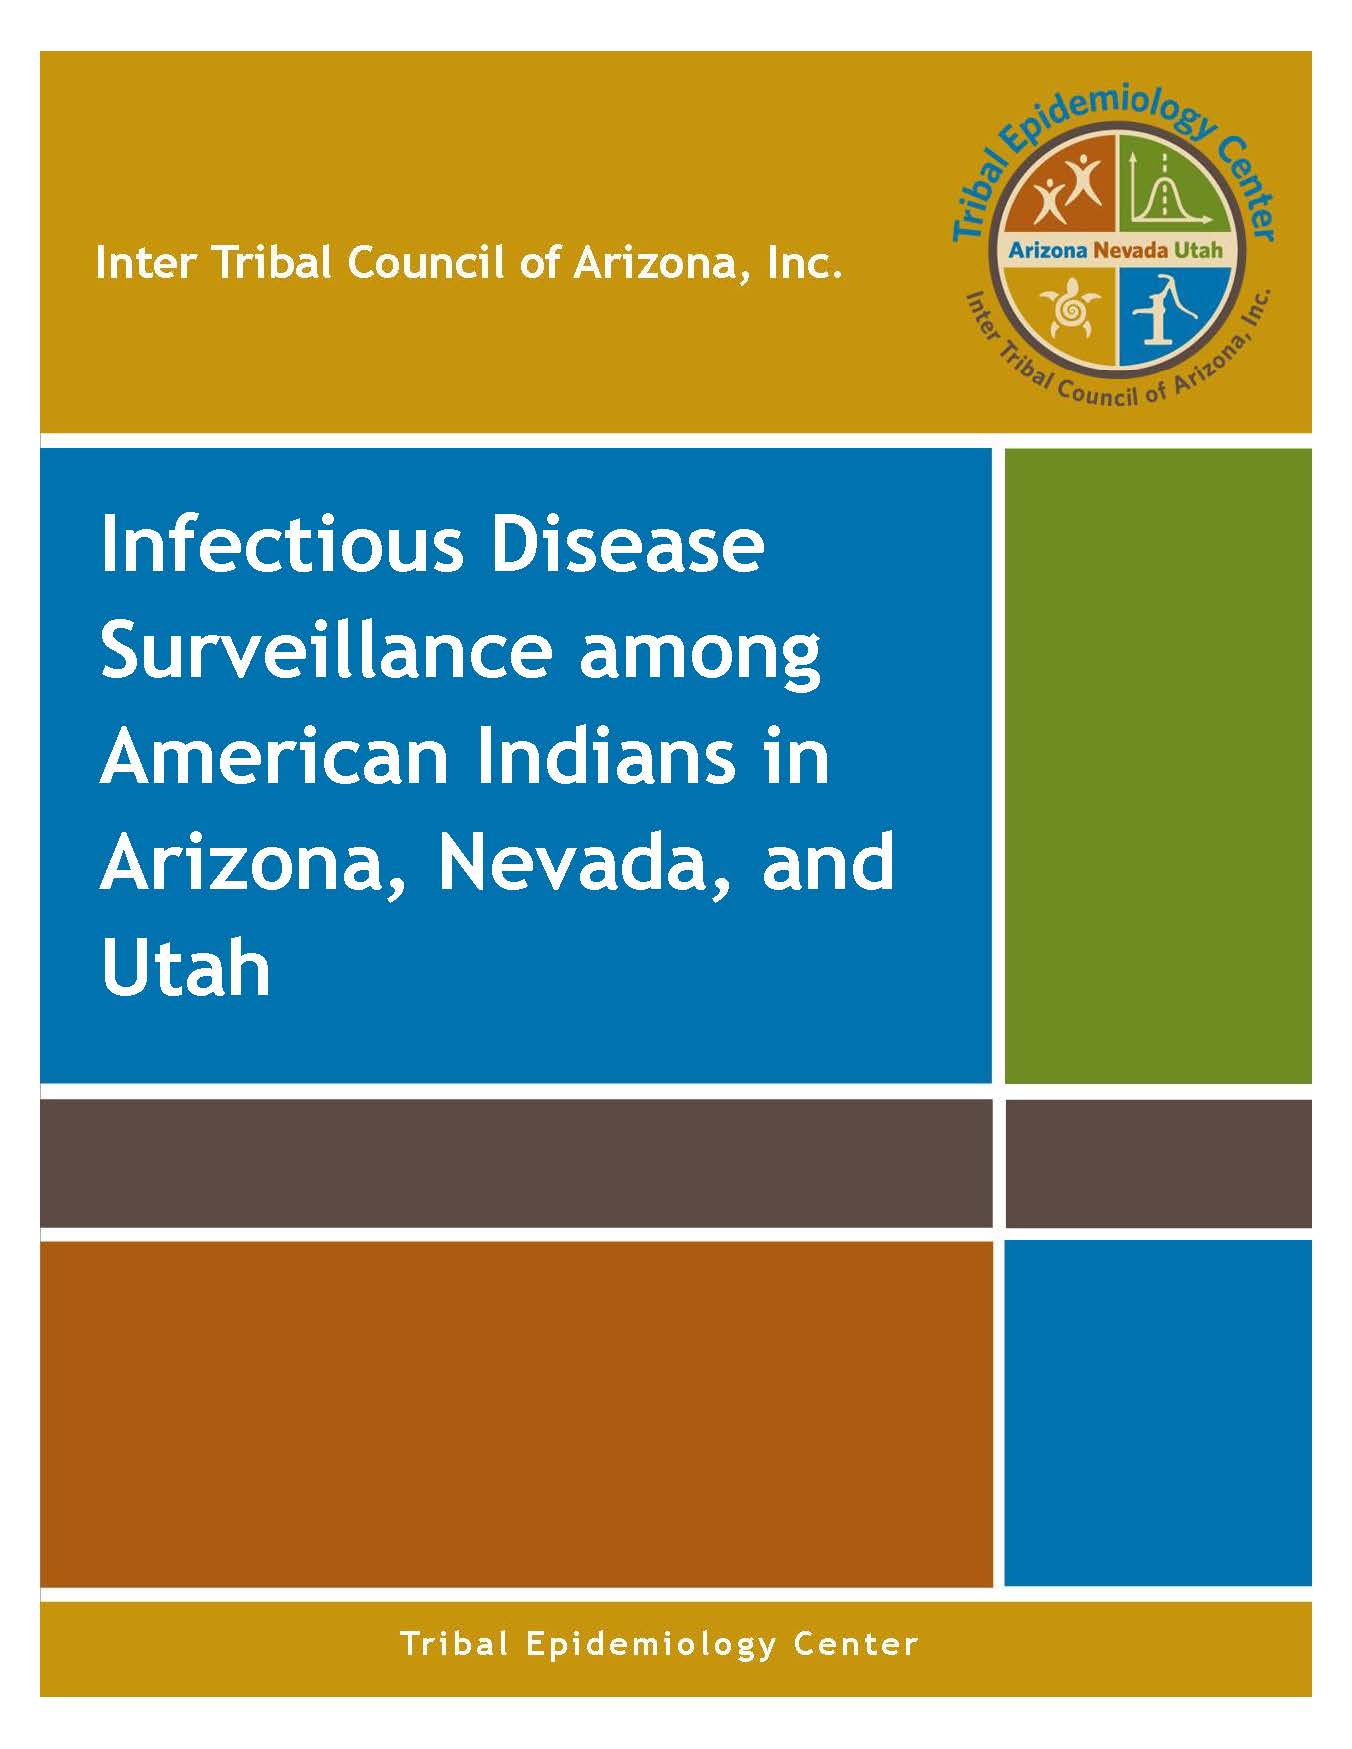 image_Infectious Disease report